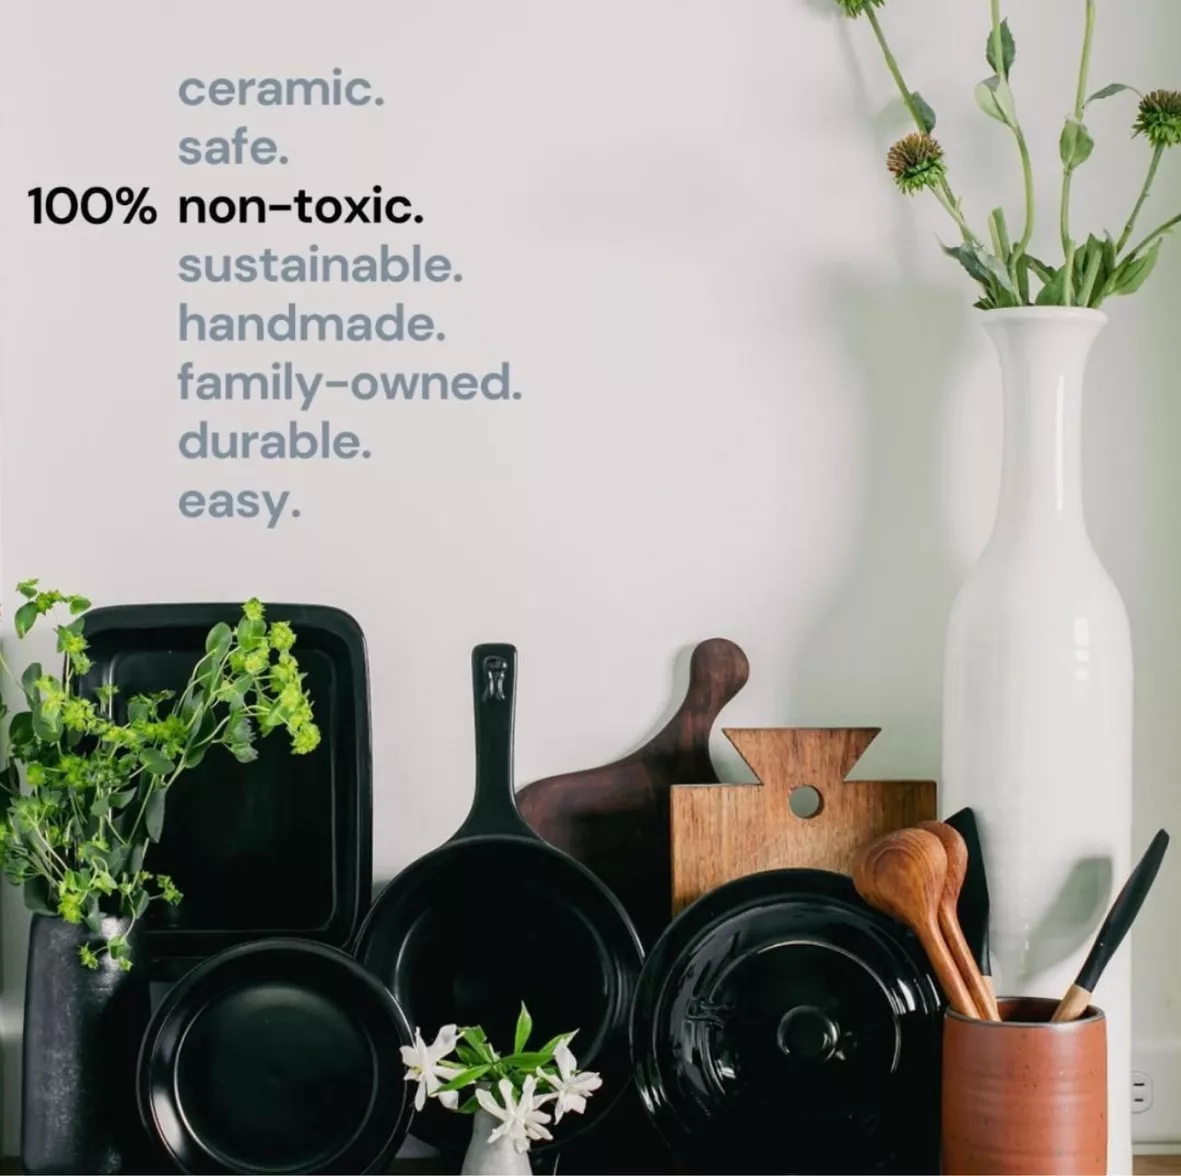 How to Use Our Pure Ceramic Cookware, Xtrema Cookware